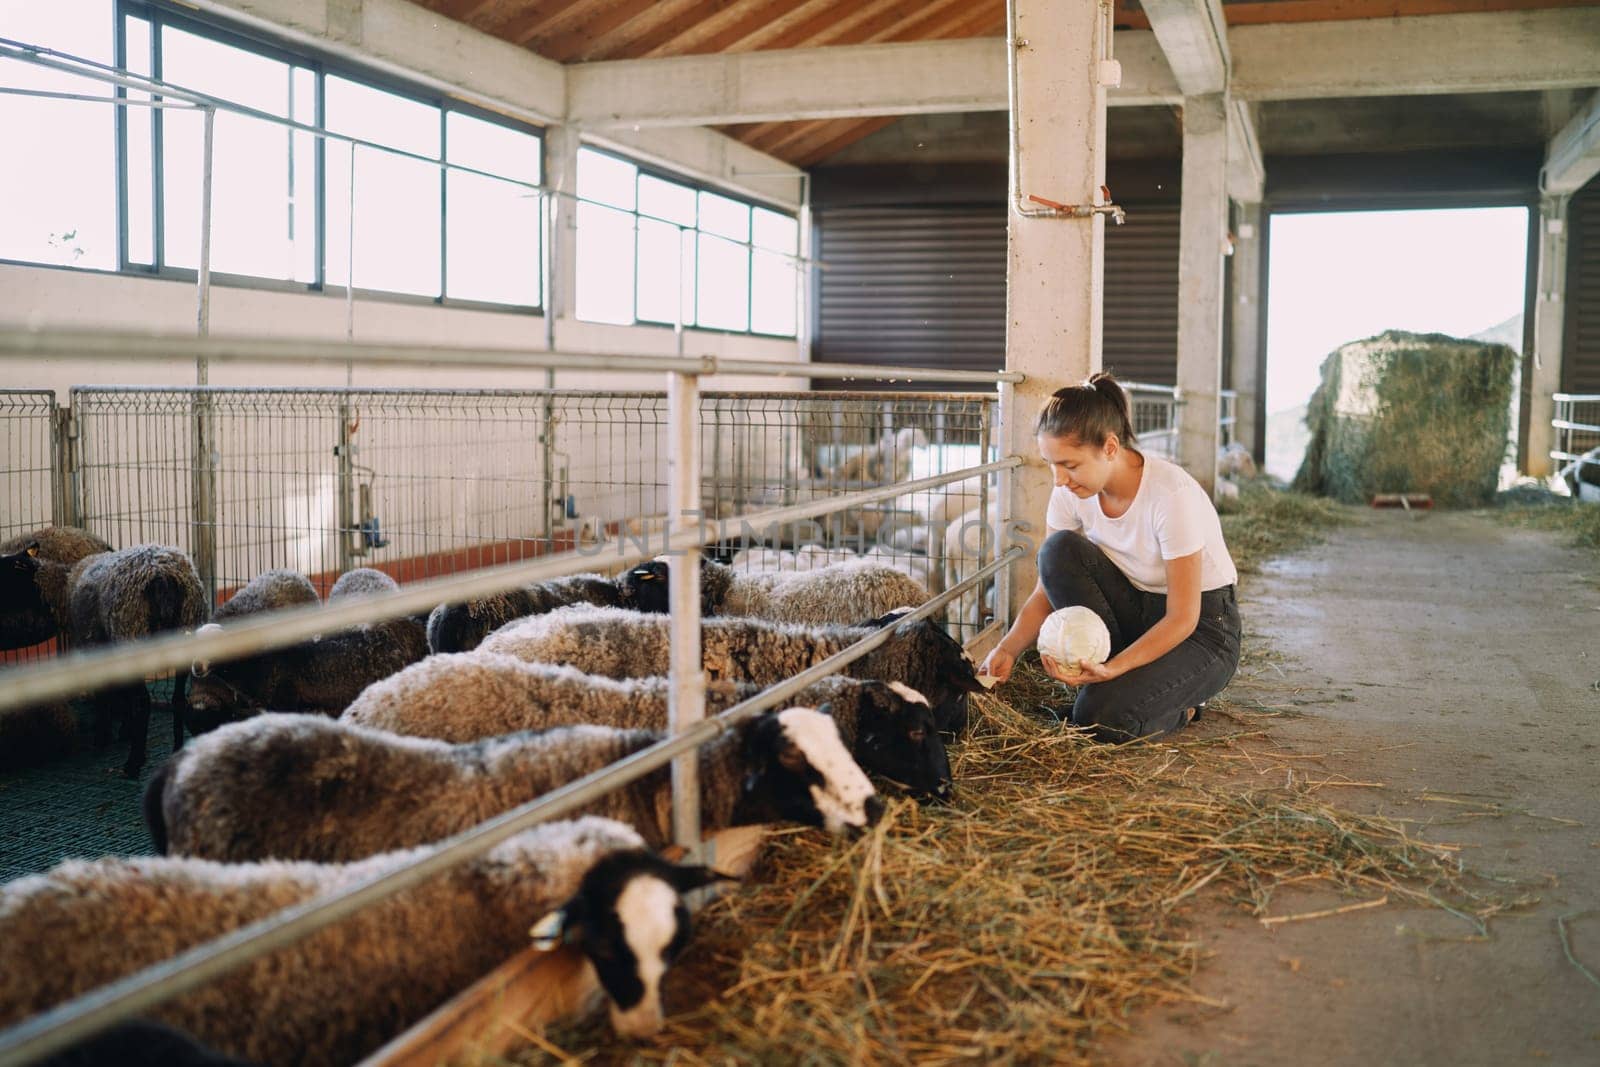 Young woman feeding a herd of black sheep on a farm with cabbage leaves while squatting. High quality photo